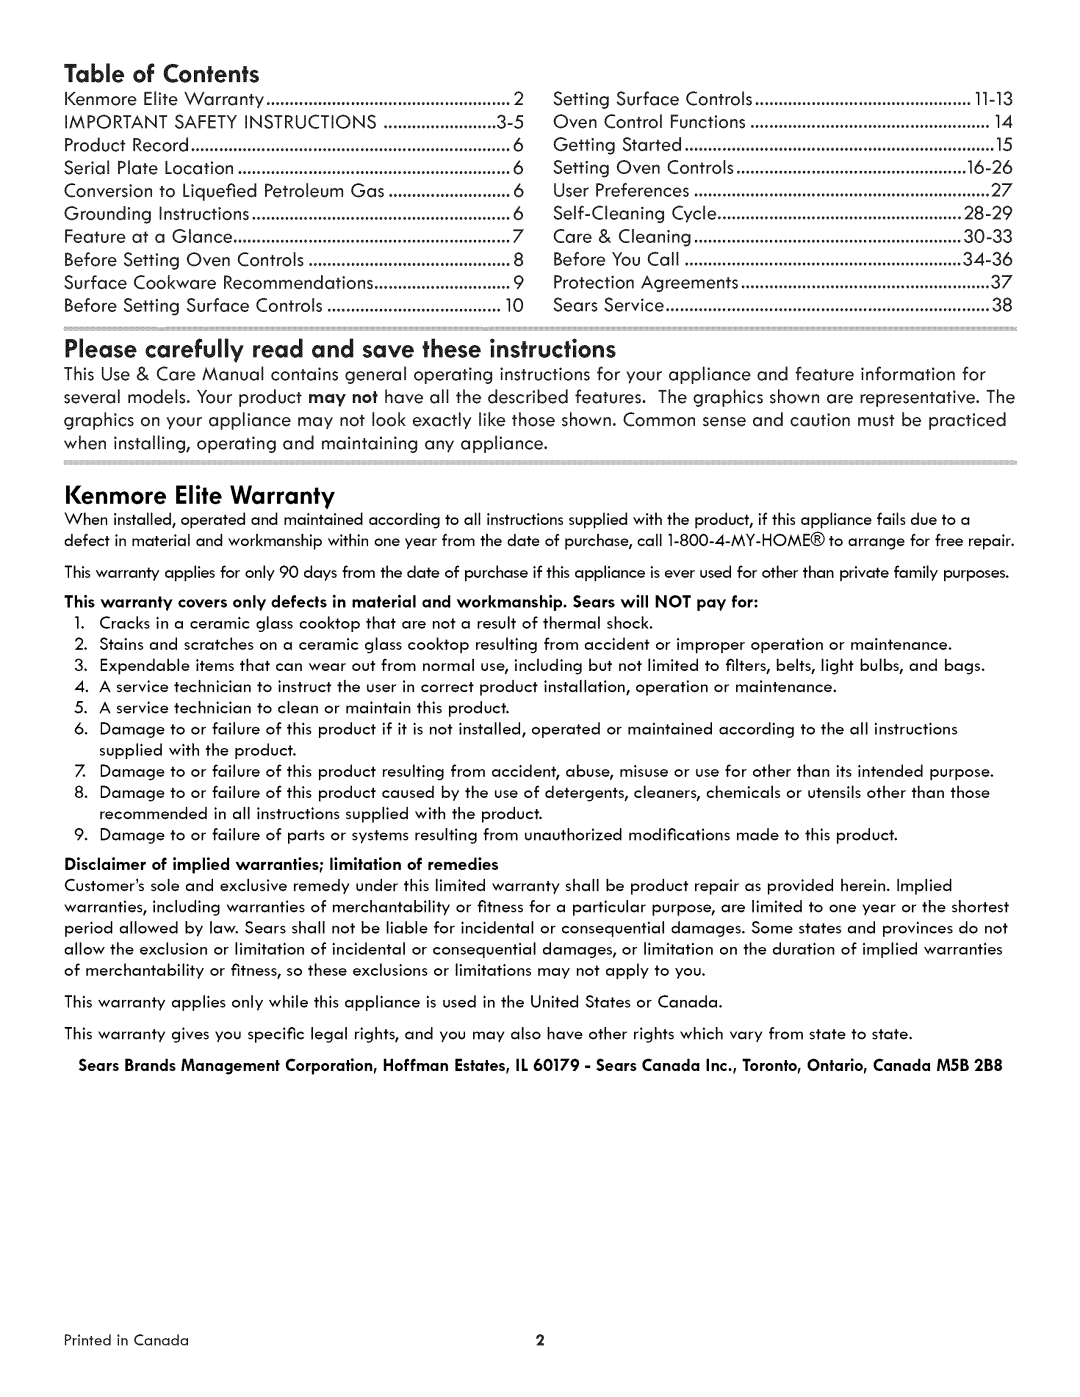 Kenmore 790.3105 Table, Please carefully read and save these instructions, of Contents, Kenmore Elite Warranty, Product 